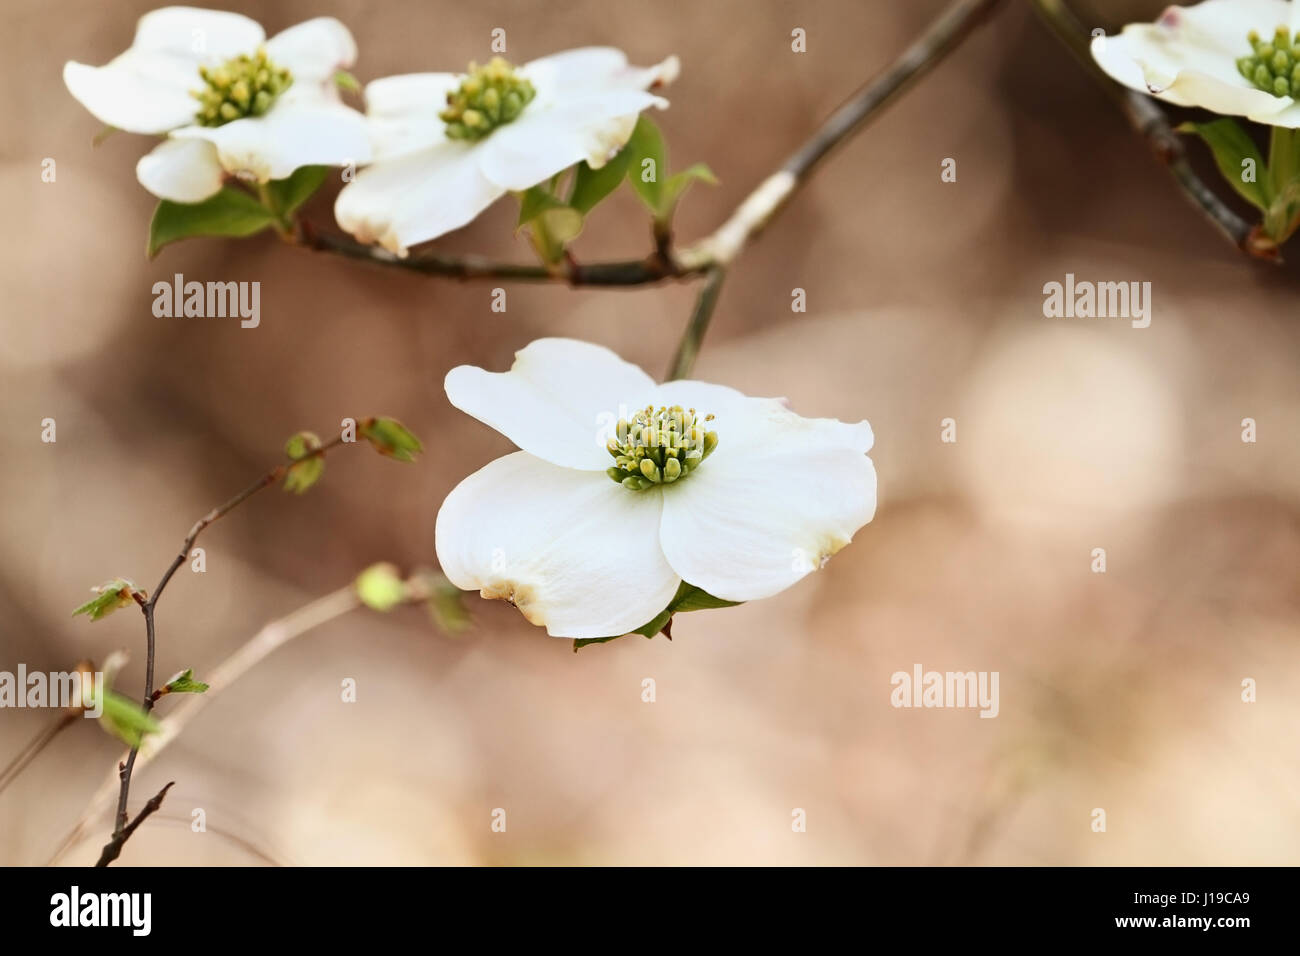 Flowering dogwood blossoms against a soft background. Extreme shallow depth of field with selective focus on center of flower in foreground. Stock Photo